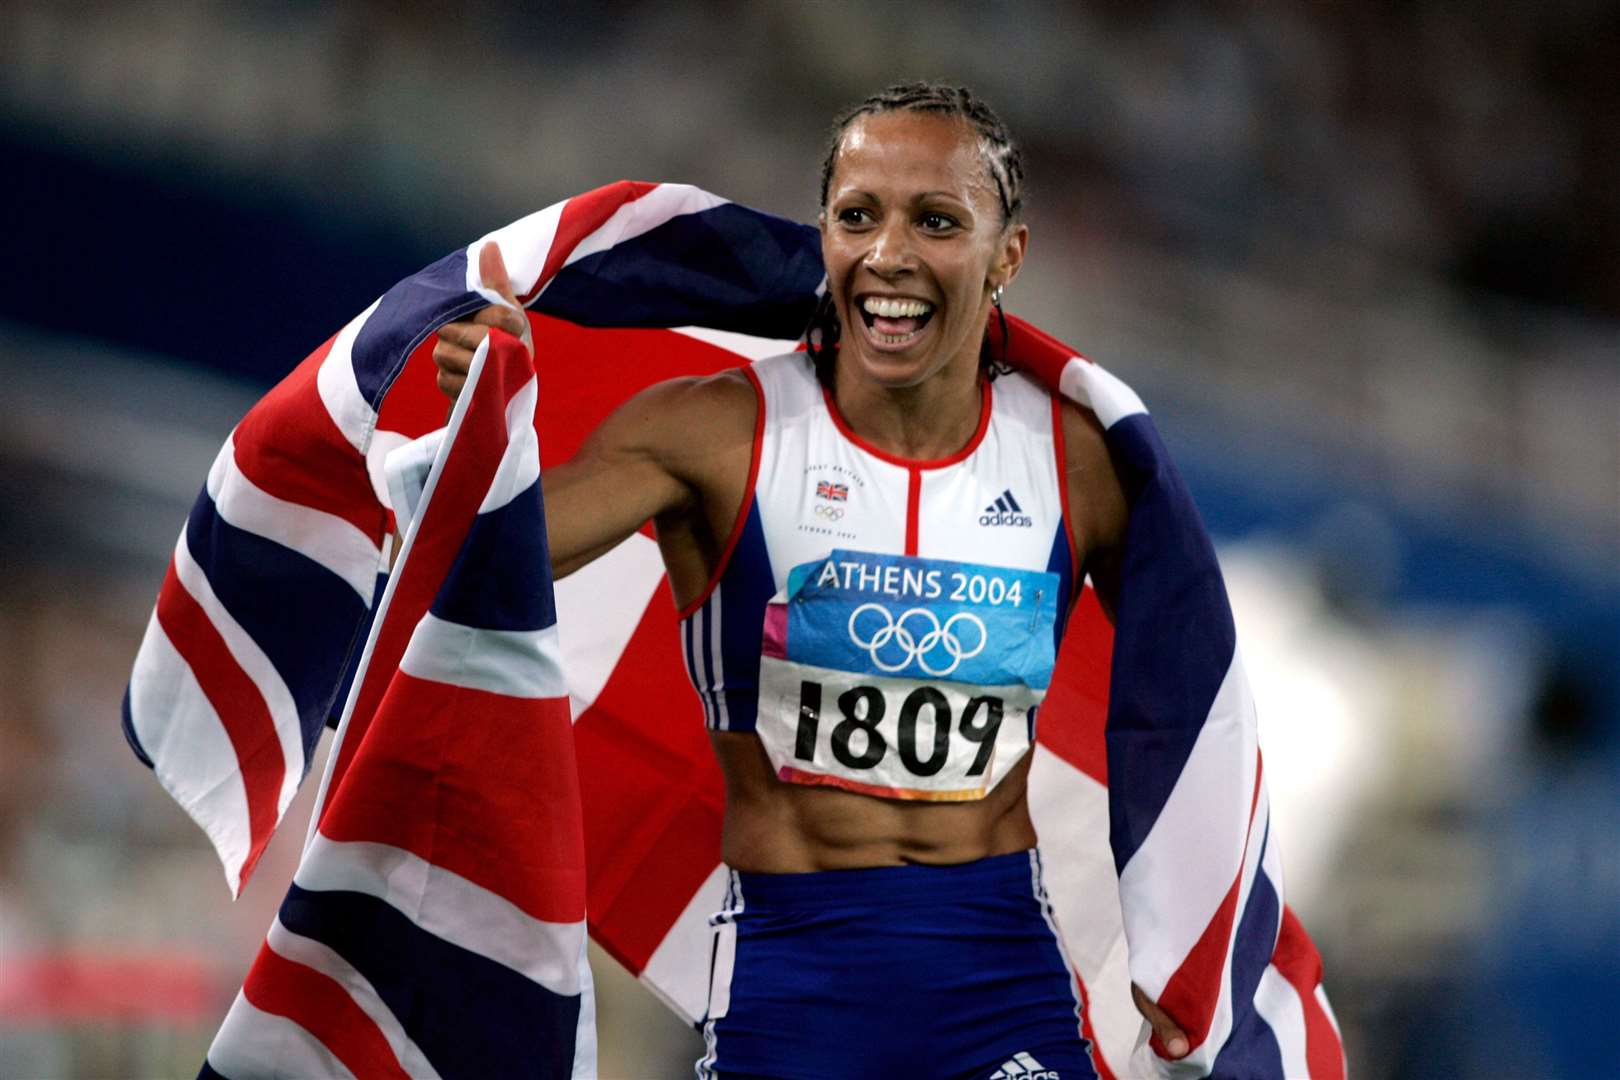 Double Olympic gold medalist Dame Kelly Holmes in Athens 2004. Picture: Phil Noble/PA